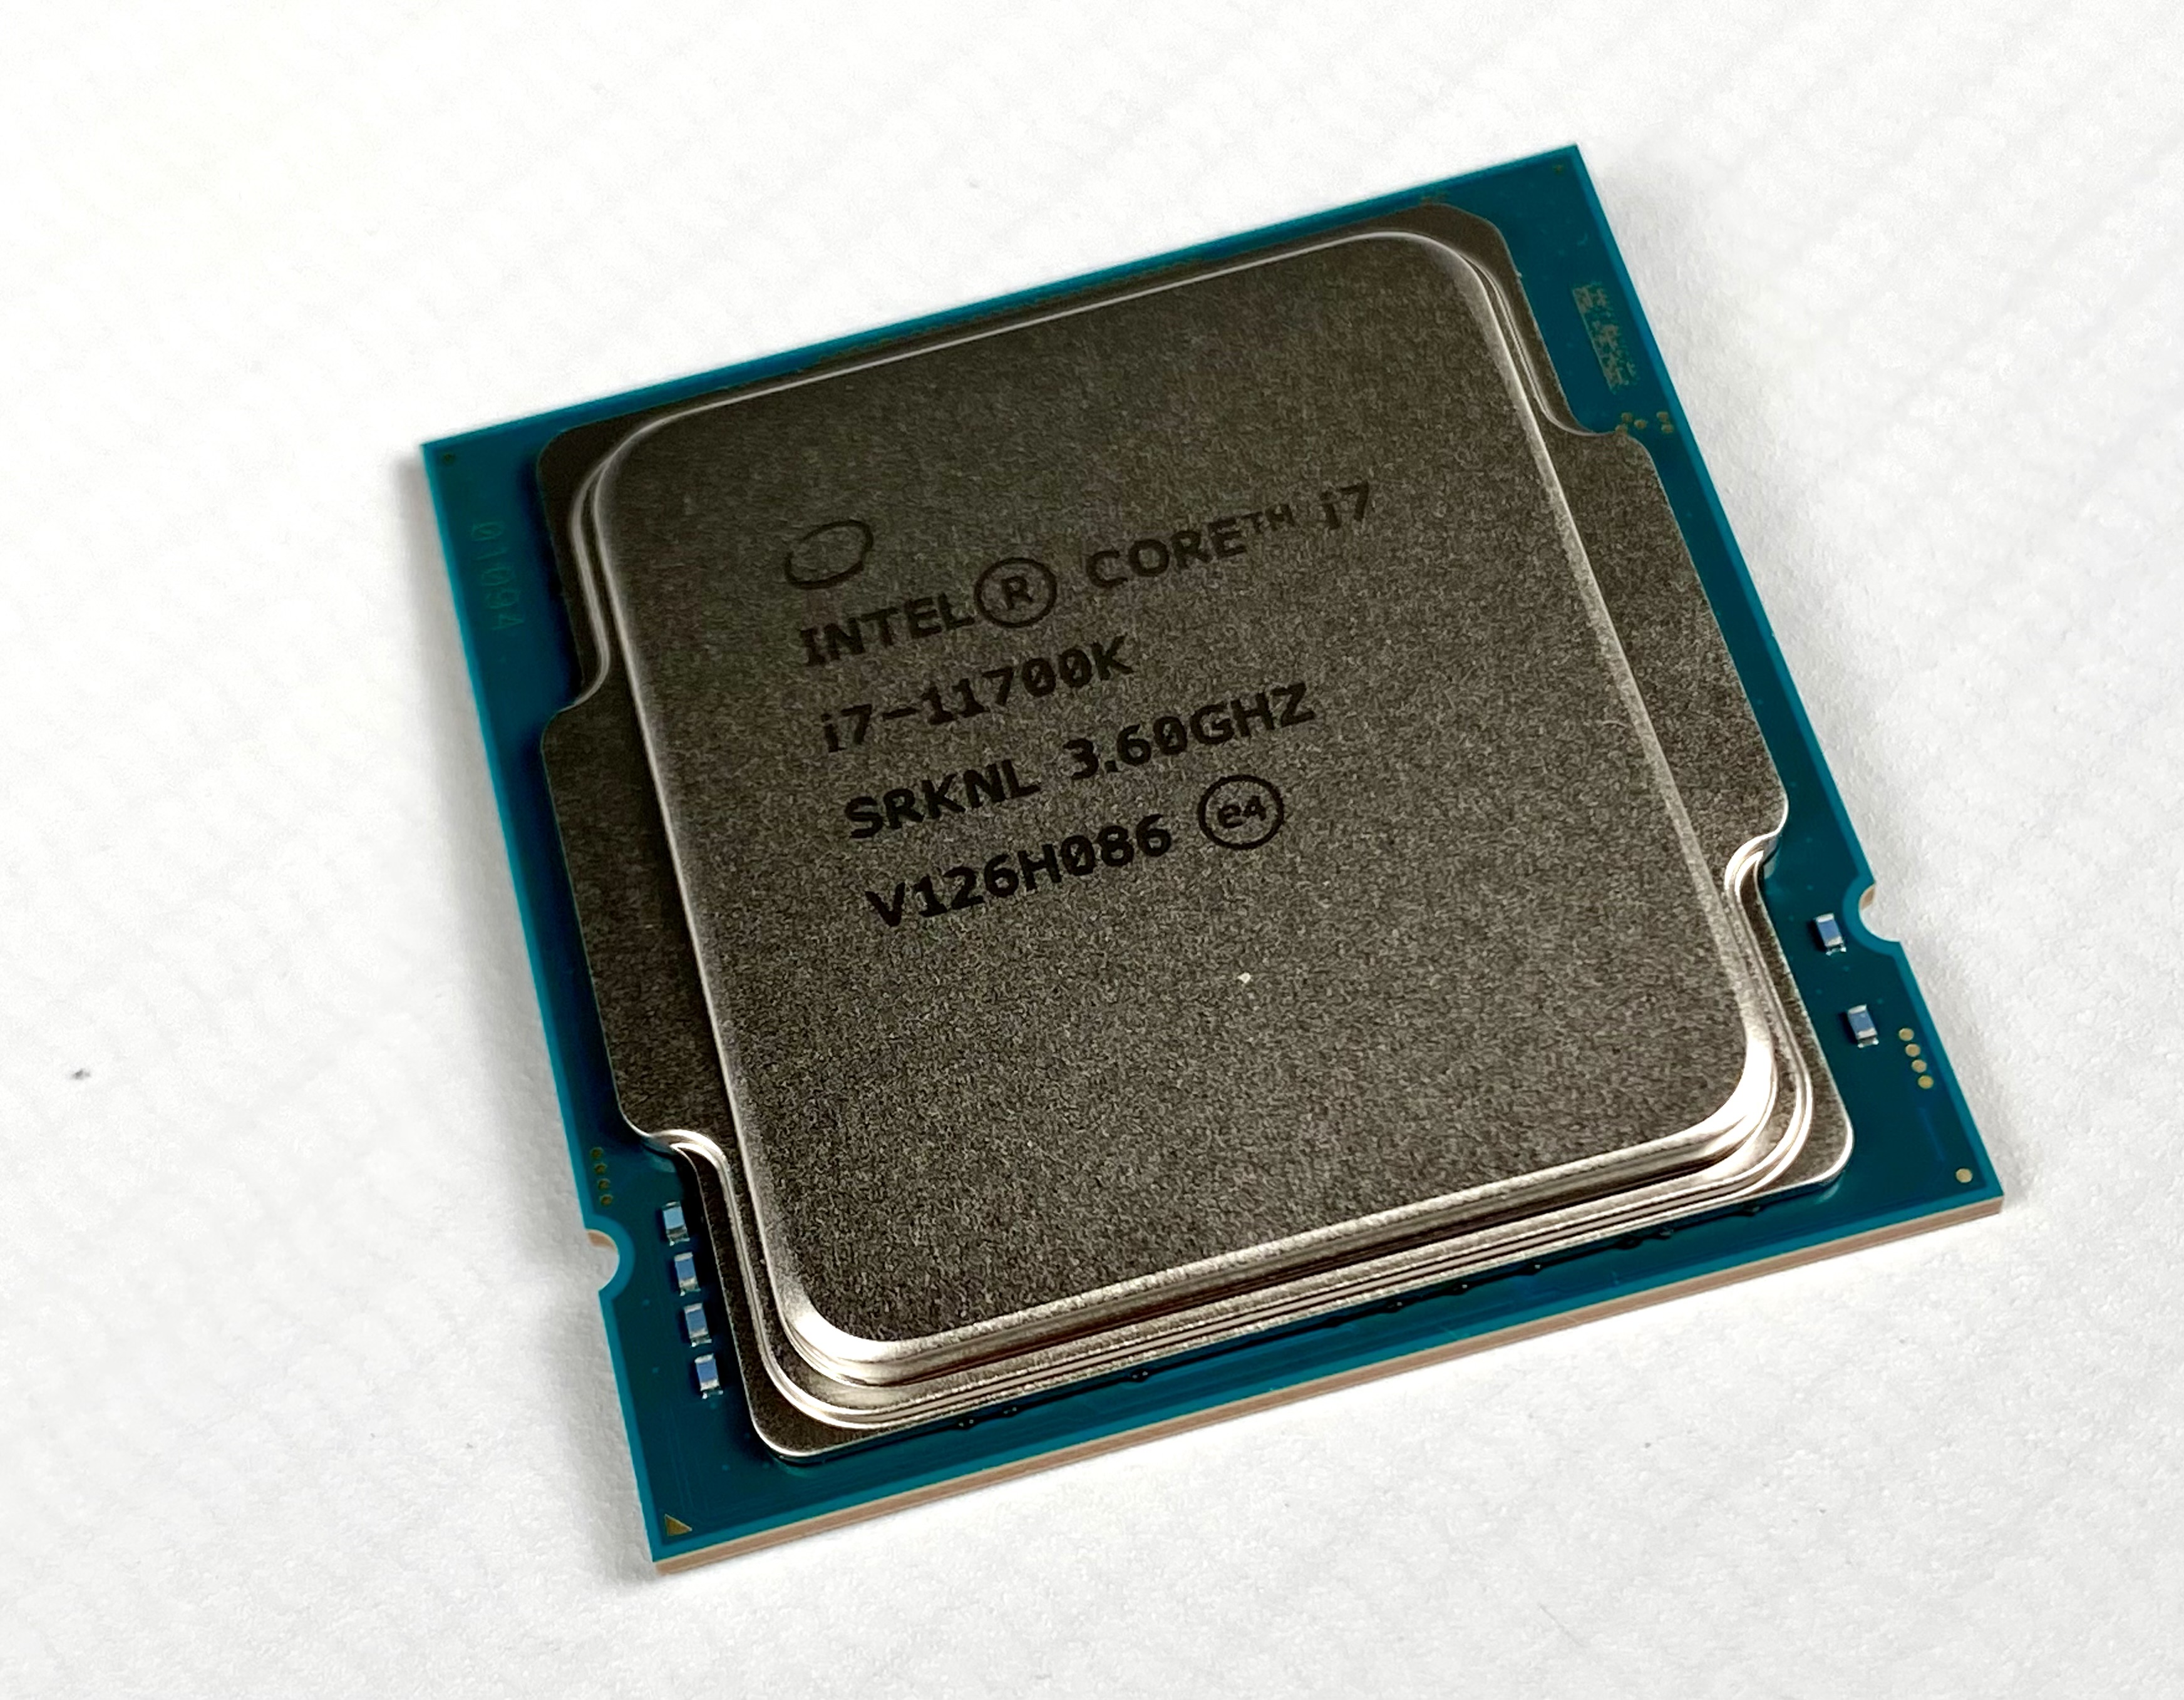 Intel Core i7-11700K Processor - Benchmarks and Specs